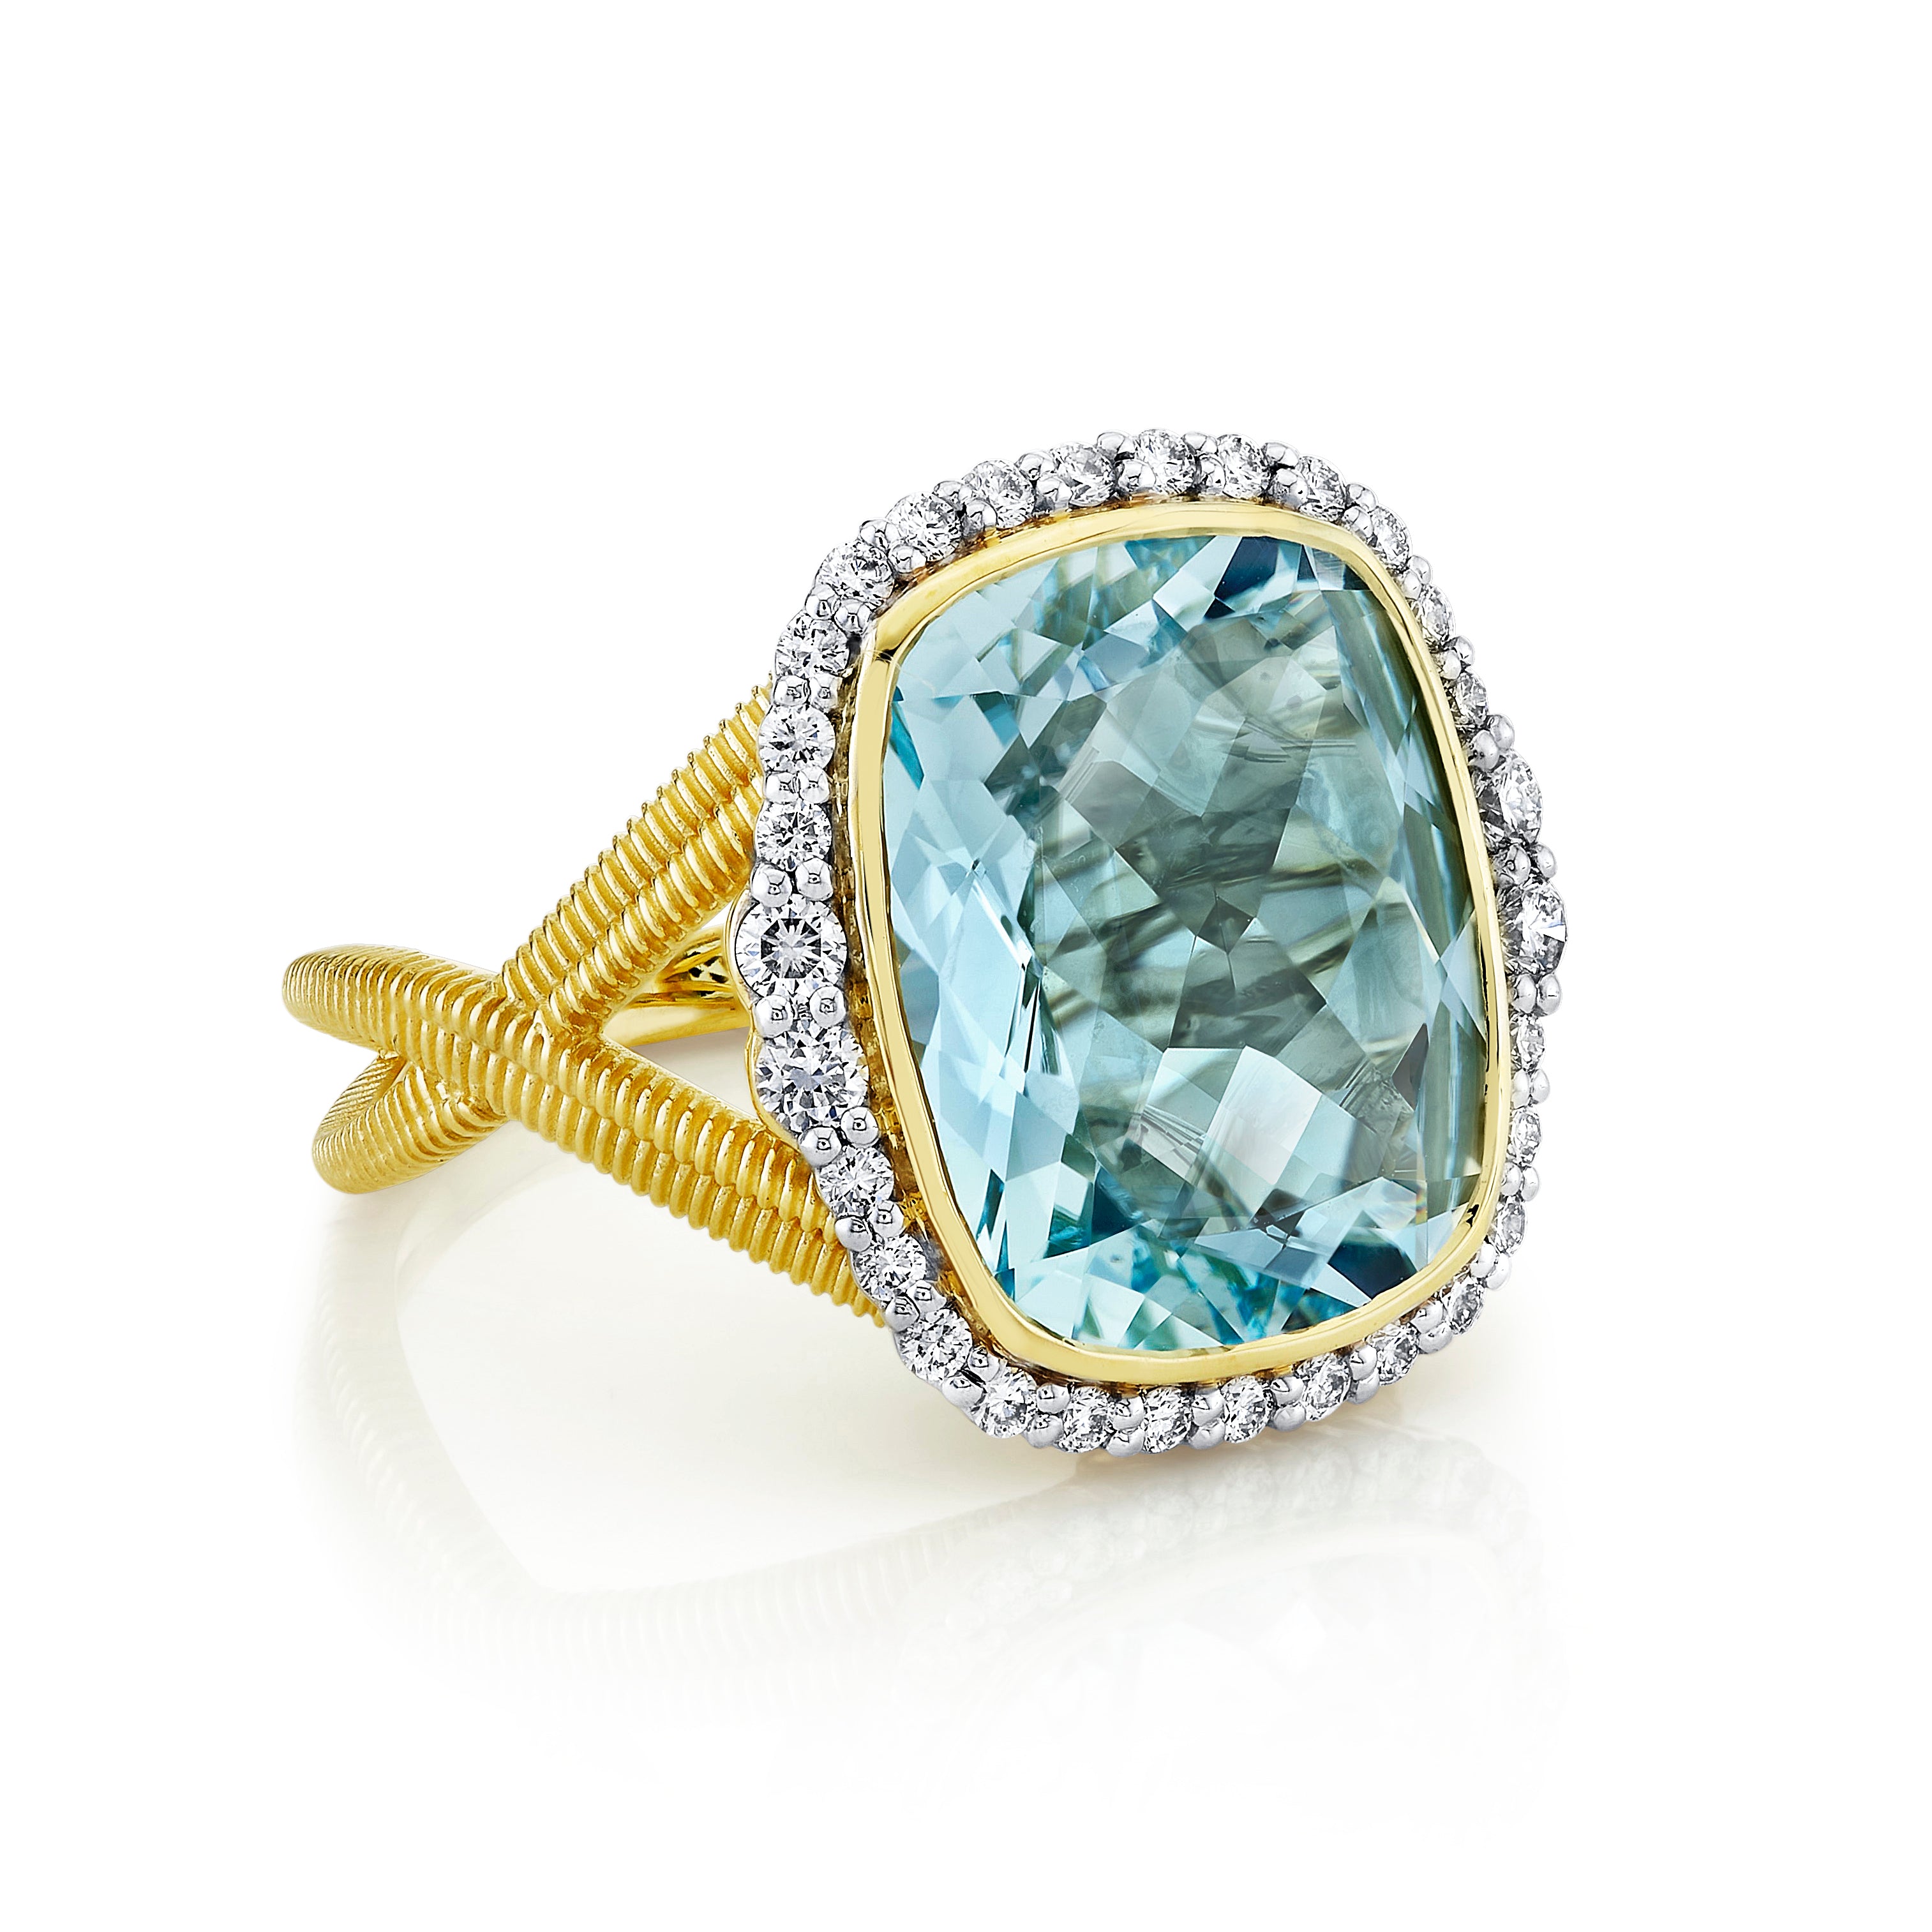 Sky Blue Topaz Ring with Diamond Halo and Criss-Cross Strie Shank